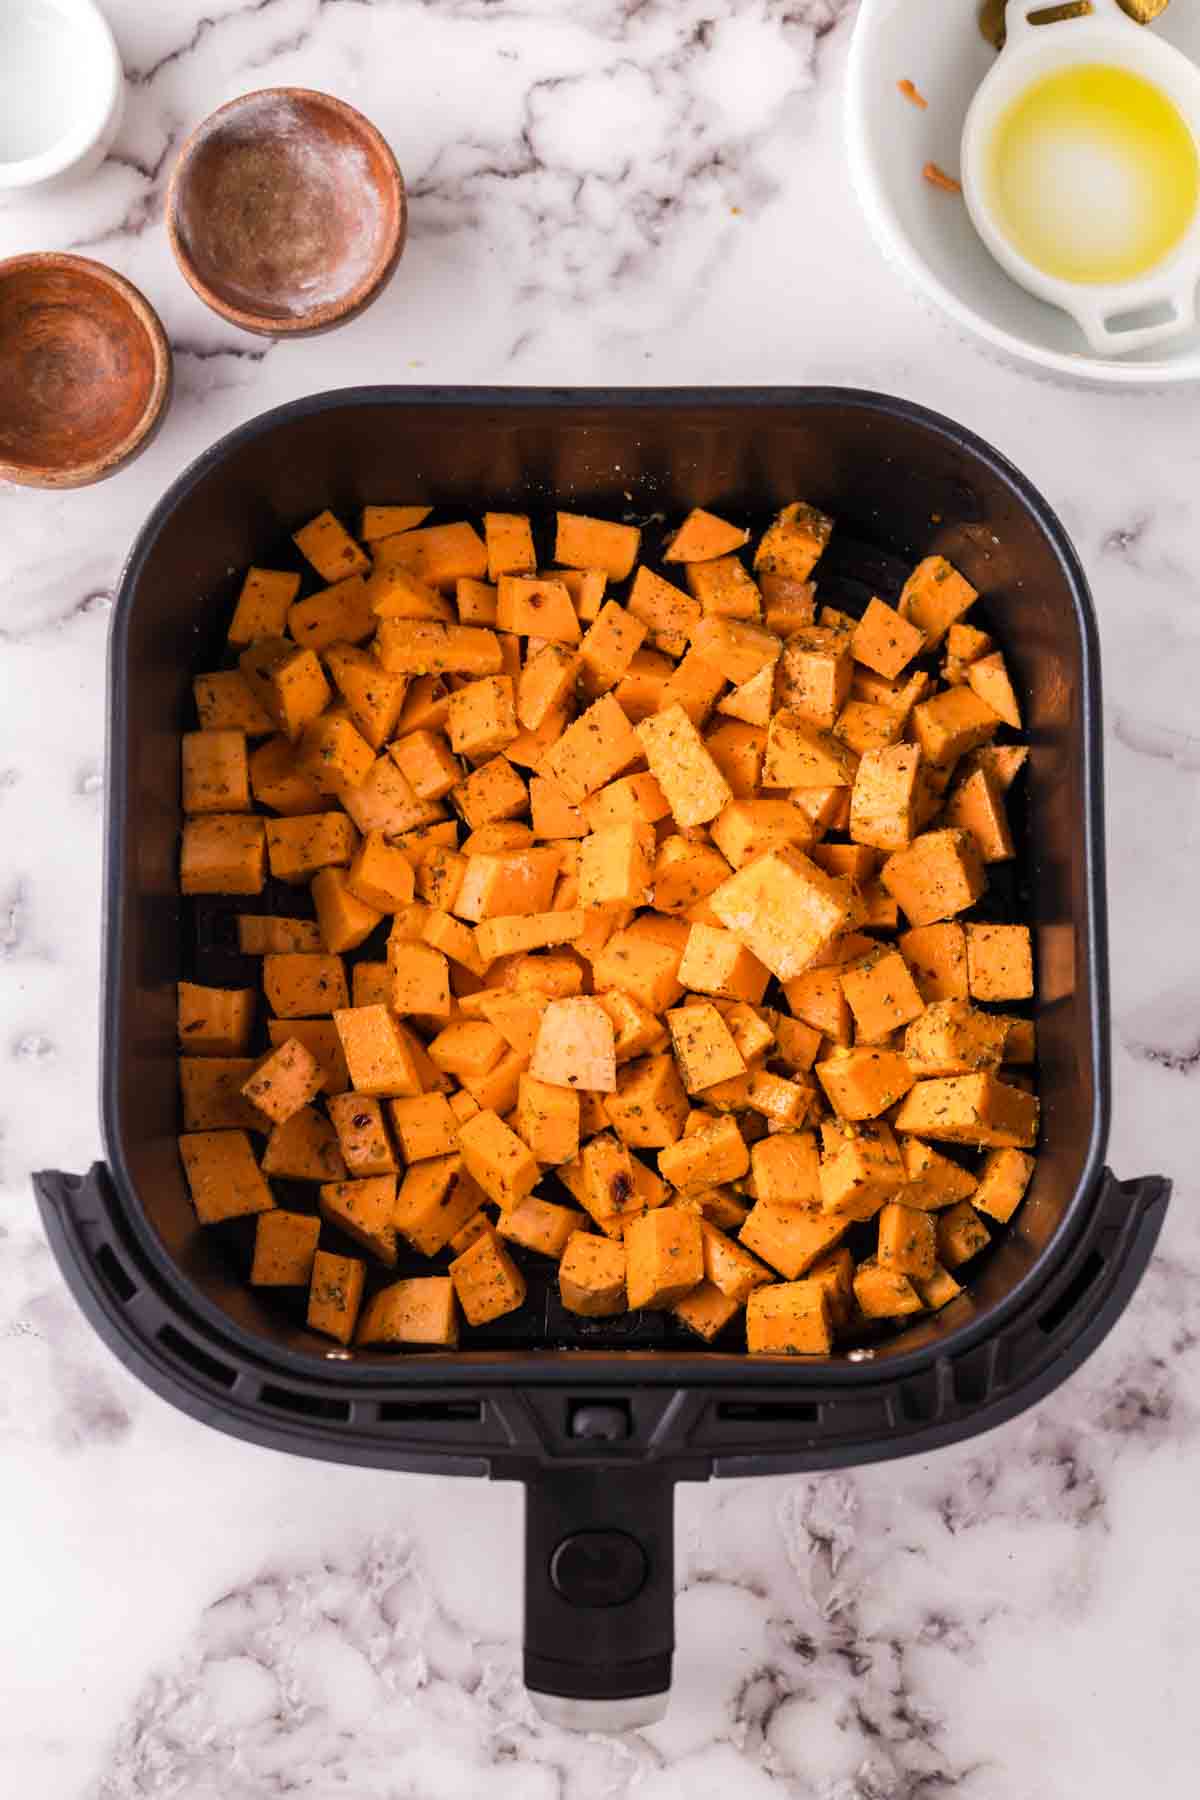 uncooked squares of sweet potatoes in the air fryer basket